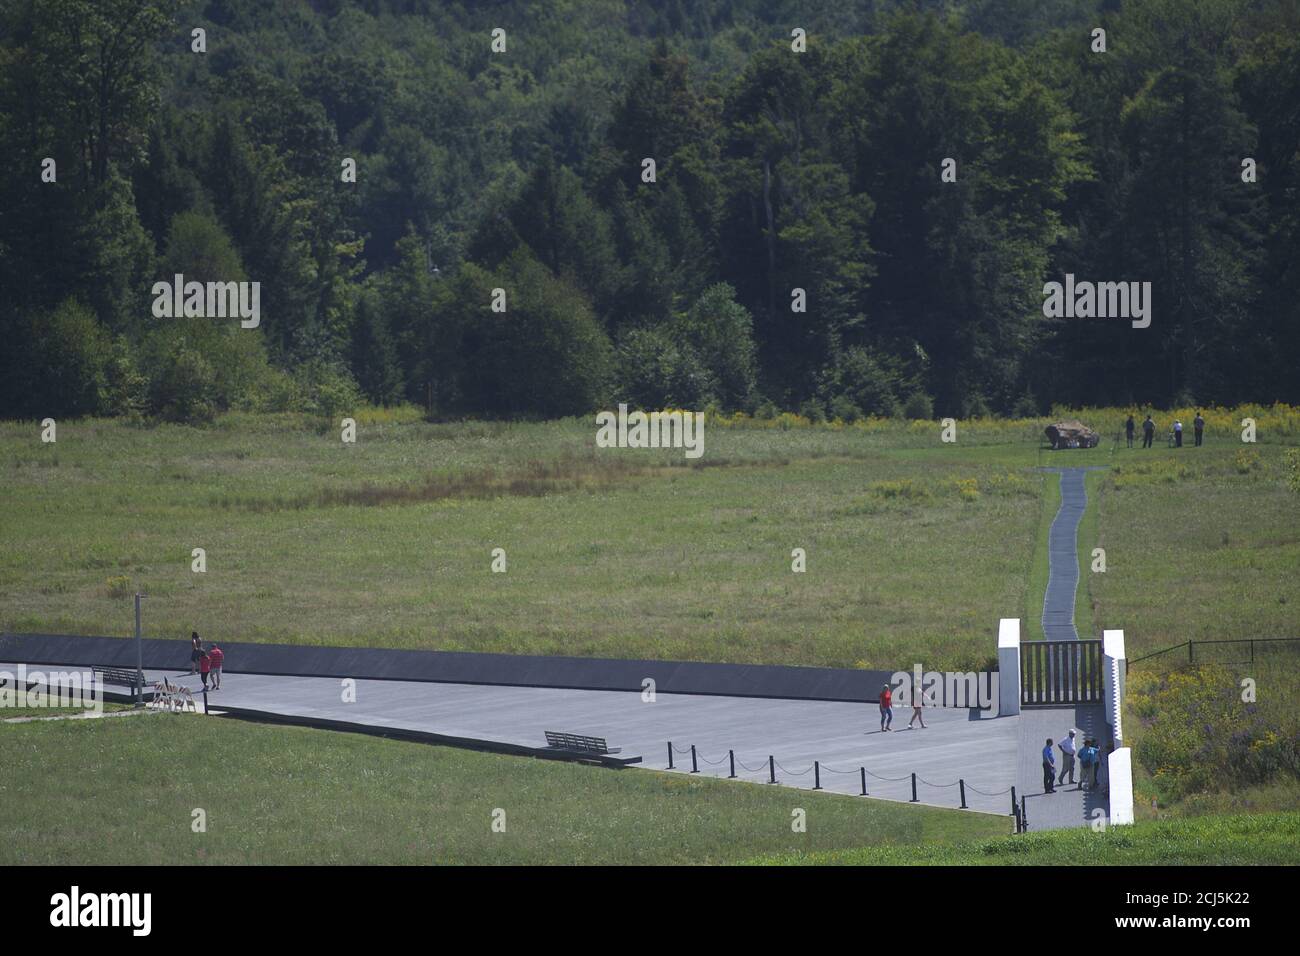 Visitors pay their respects at the crash site of Flight 93, a United States National Park Service Memorial which opened on Wednesday in Shanksville, Pennsylvania, September 9, 2015. The new $50 million visitors center at the heart of a national memorial created out of the crash site will be formally dedicated on Thursday, a day before ceremonies mark the fourteenth anniversary of the worst terrorist attack on American soil.  On September 11, 2001, one of the four planes overtaken by al Qaeda terrorists crashed into Pennsylvania, killing all 40 passengers aboard.  A 9-11 memorial ceremony will  Stock Photo